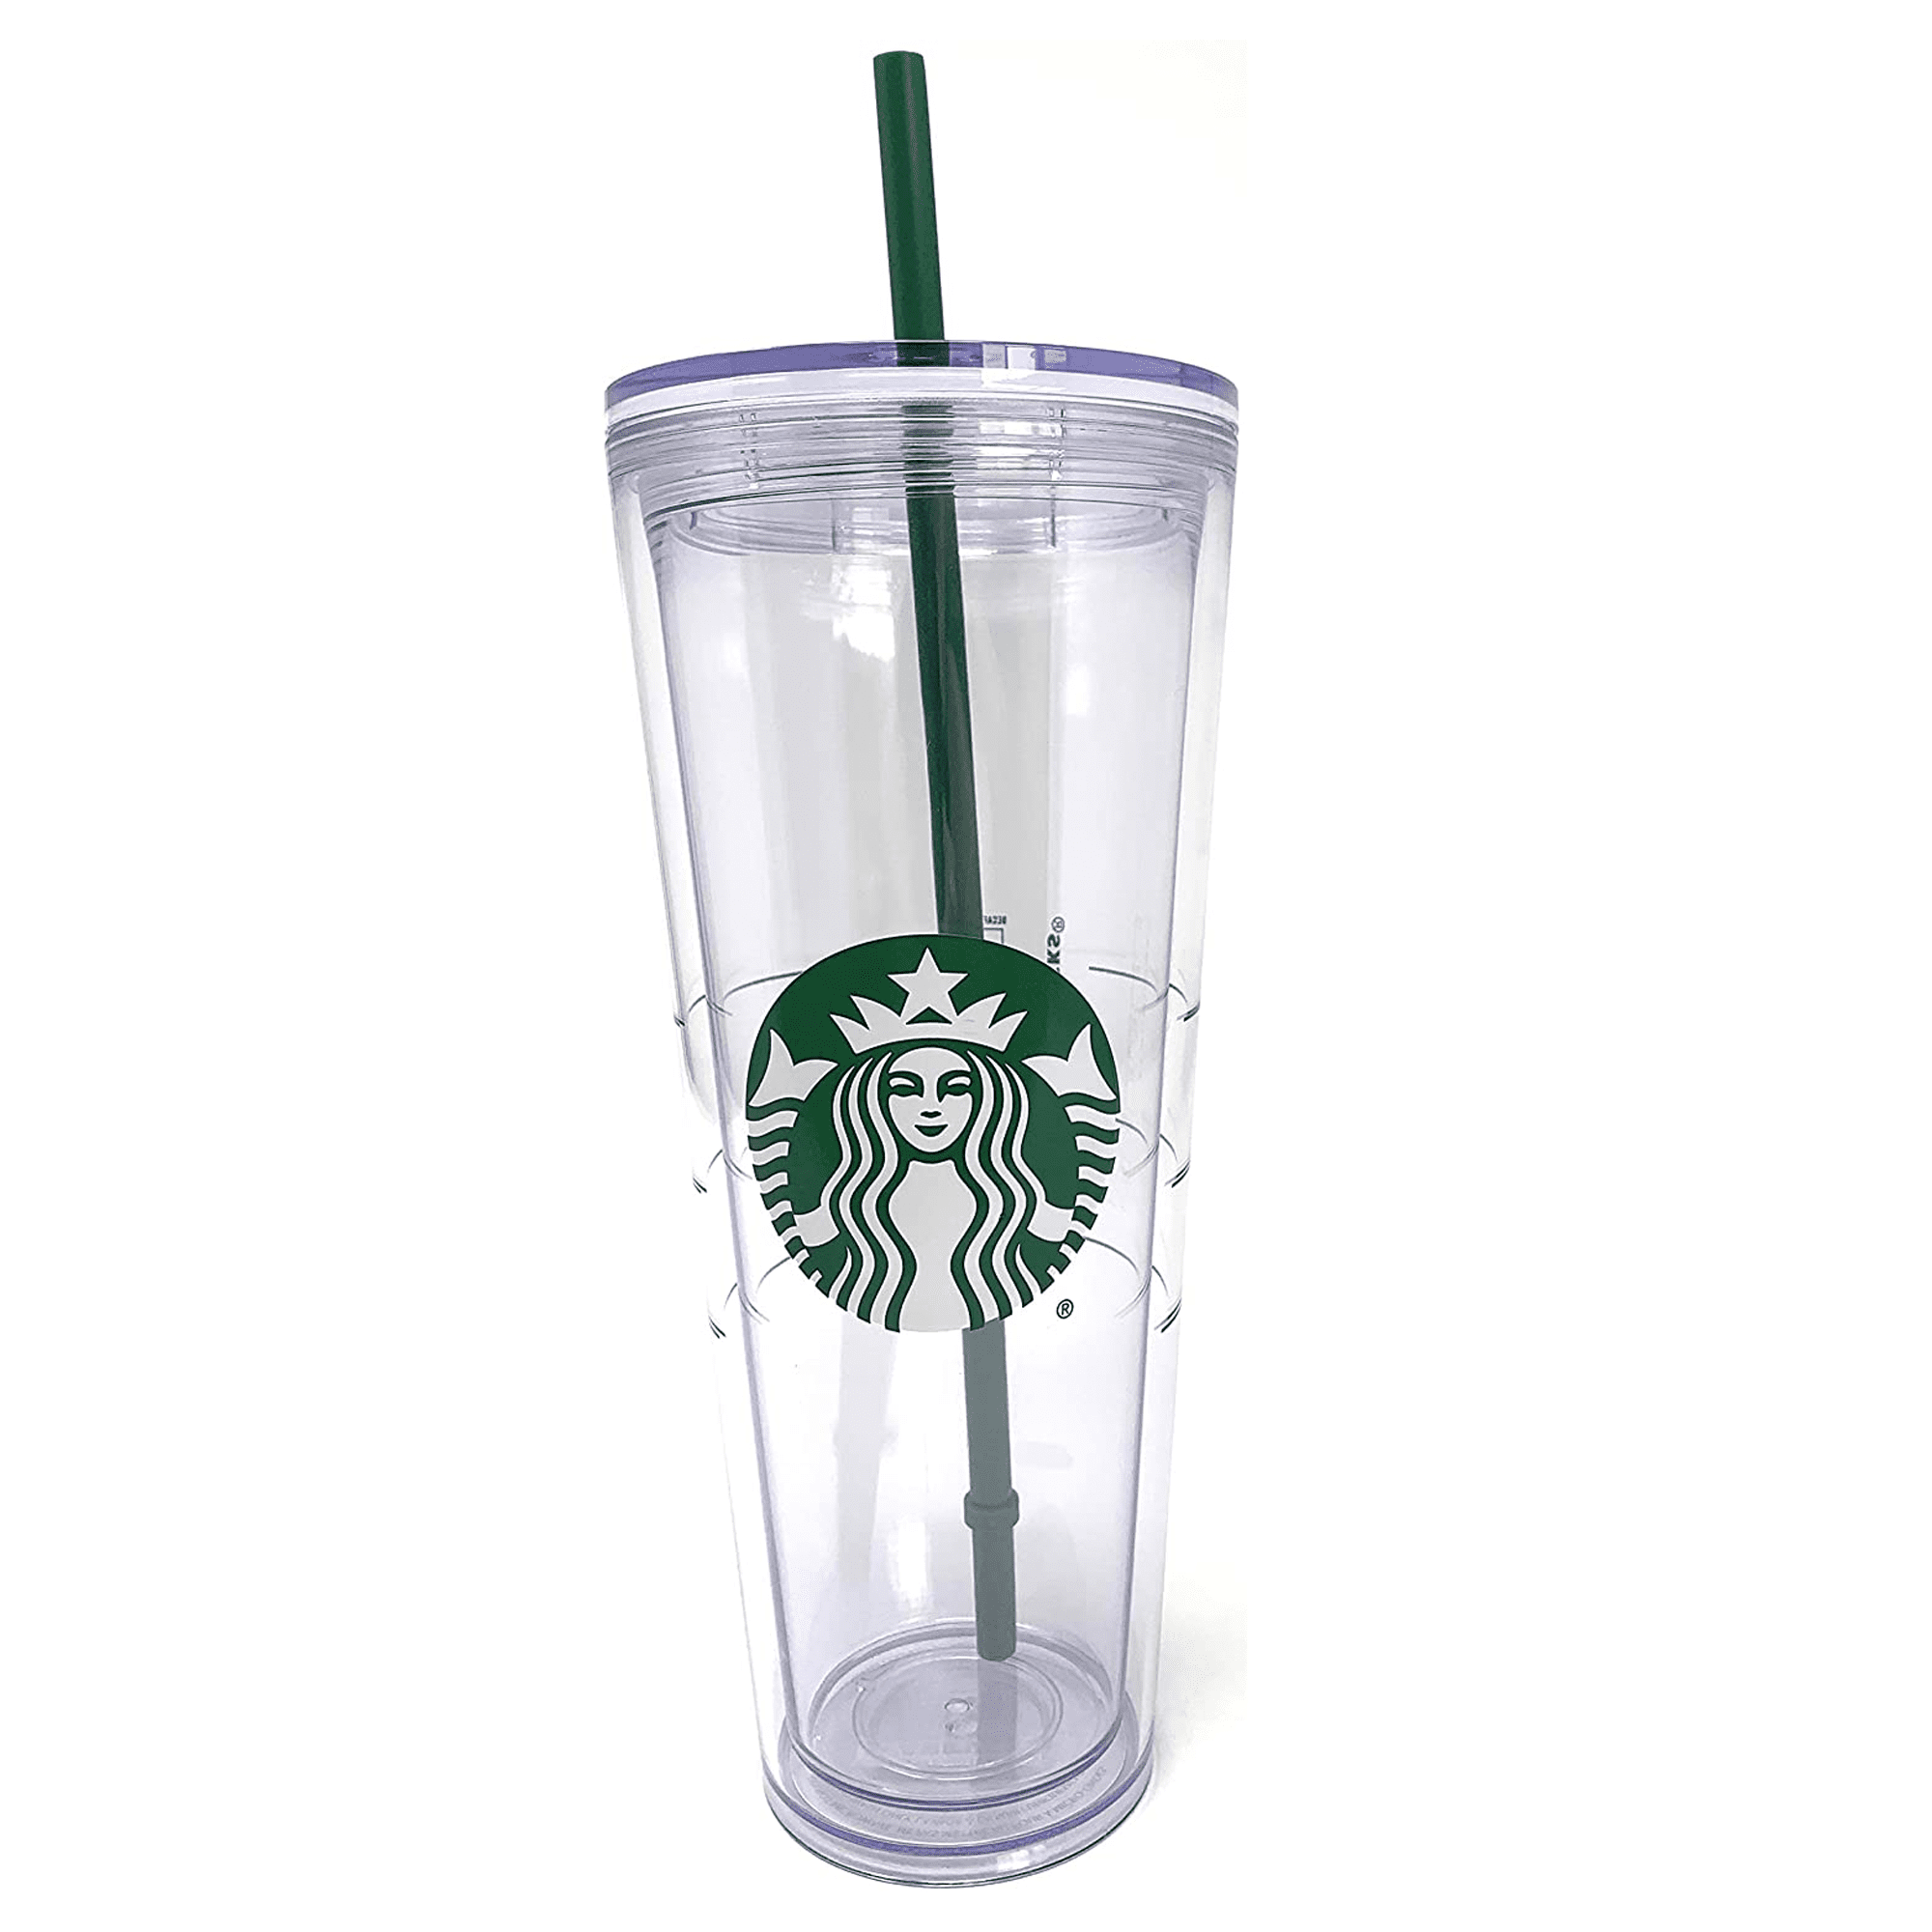 New Starbucks Hot Pink Yellow Purple Lid Cold Cup Acrylic Tumbler 16 Oz Straw 